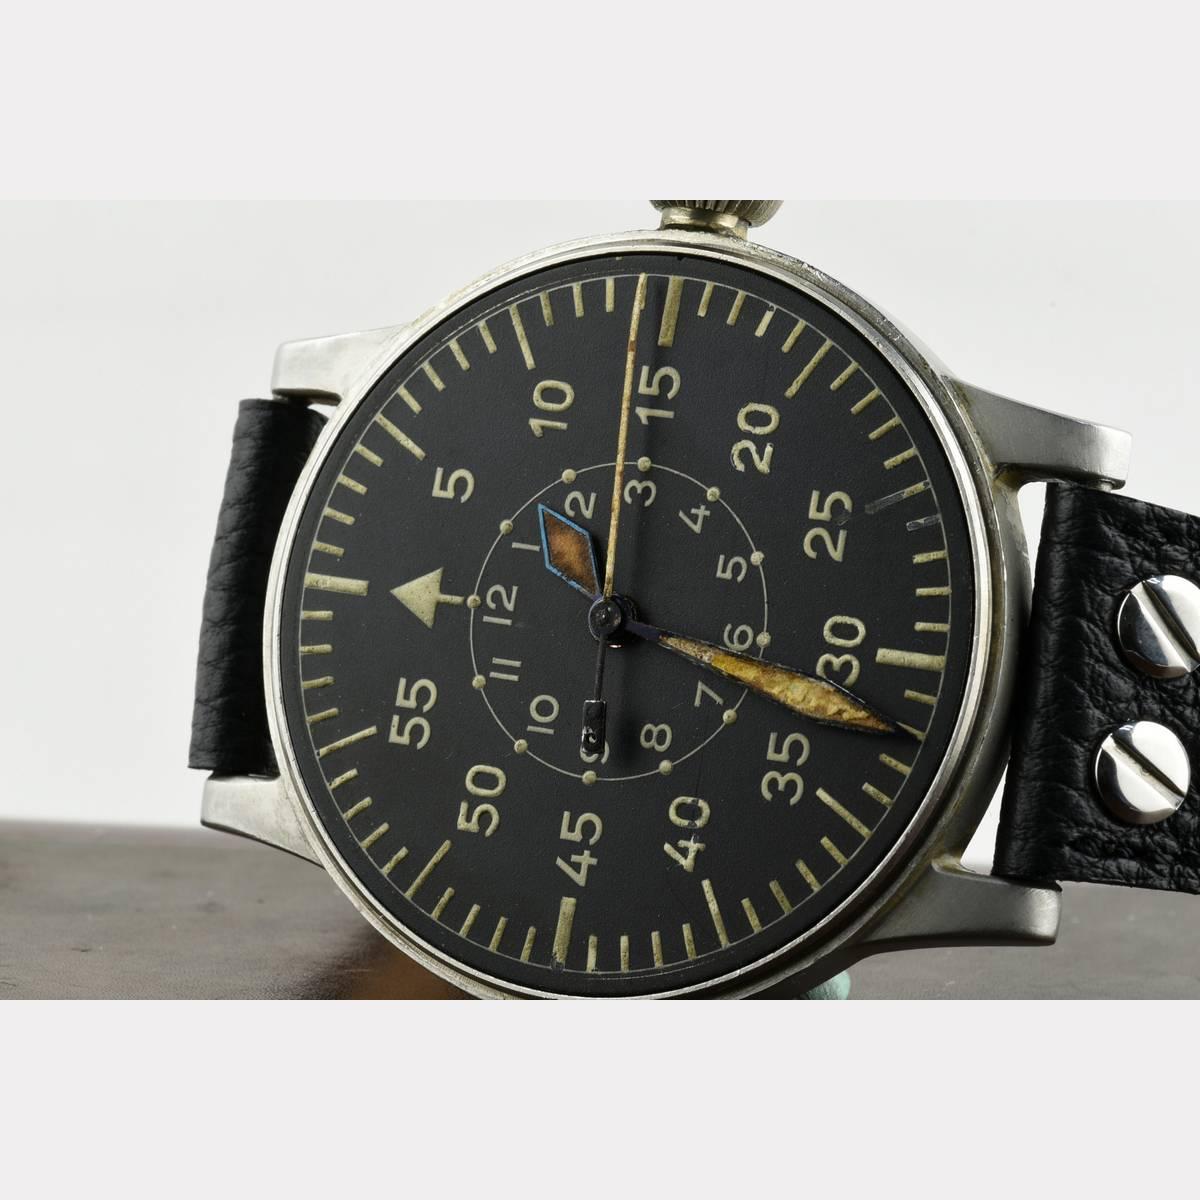 In limited numbers  and civil unavailabel execution LANGE & SÖHNE, probably the best German watchmaker, has made this watch before the last war. Because they could not cover even all needs, other companies such as Wempe, LACO etc. were consulted